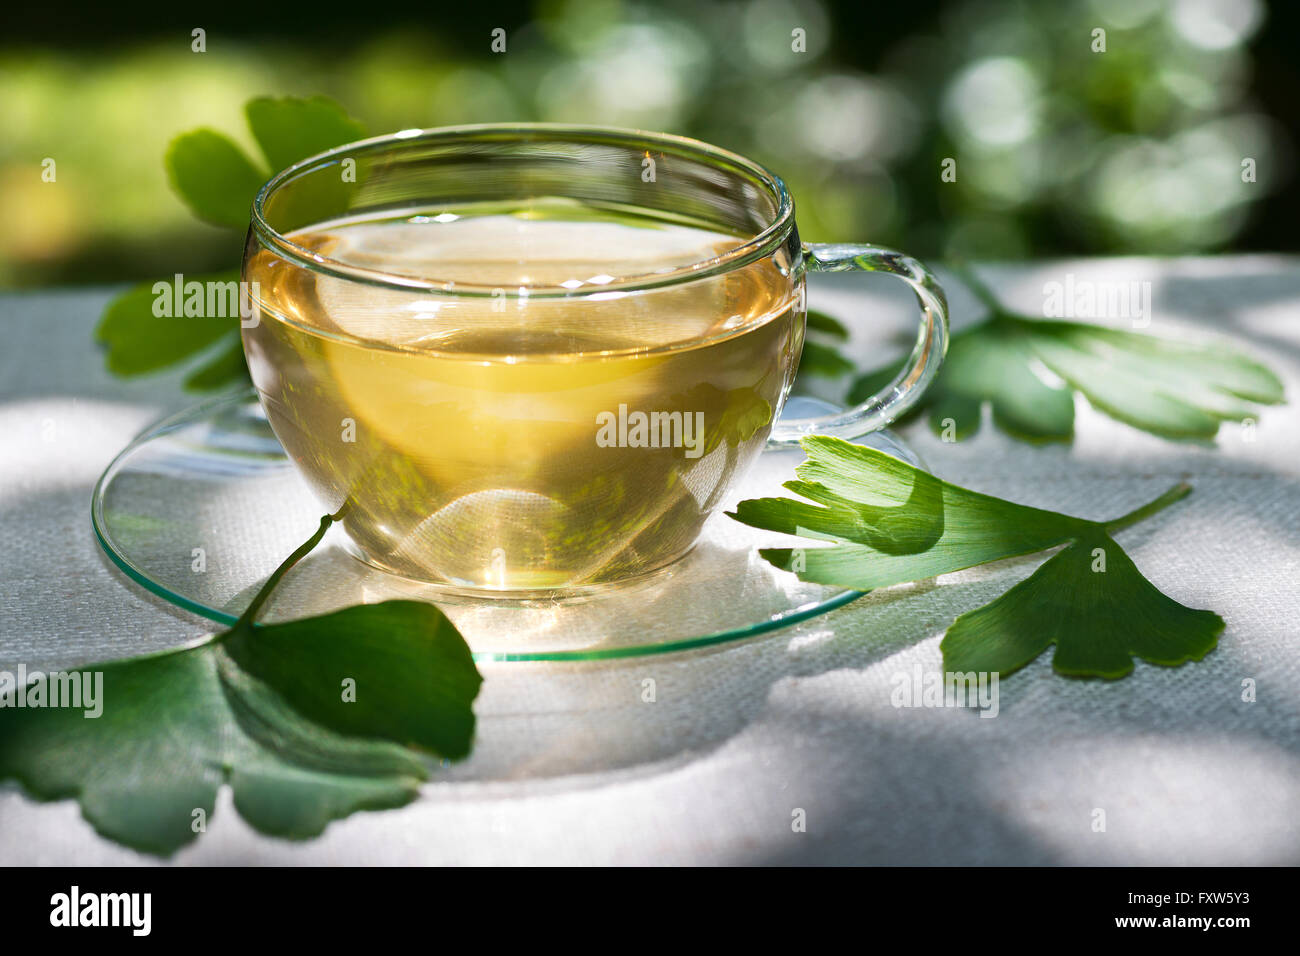 glass of herbaceous tea with ginkgo leaves Stock Photo